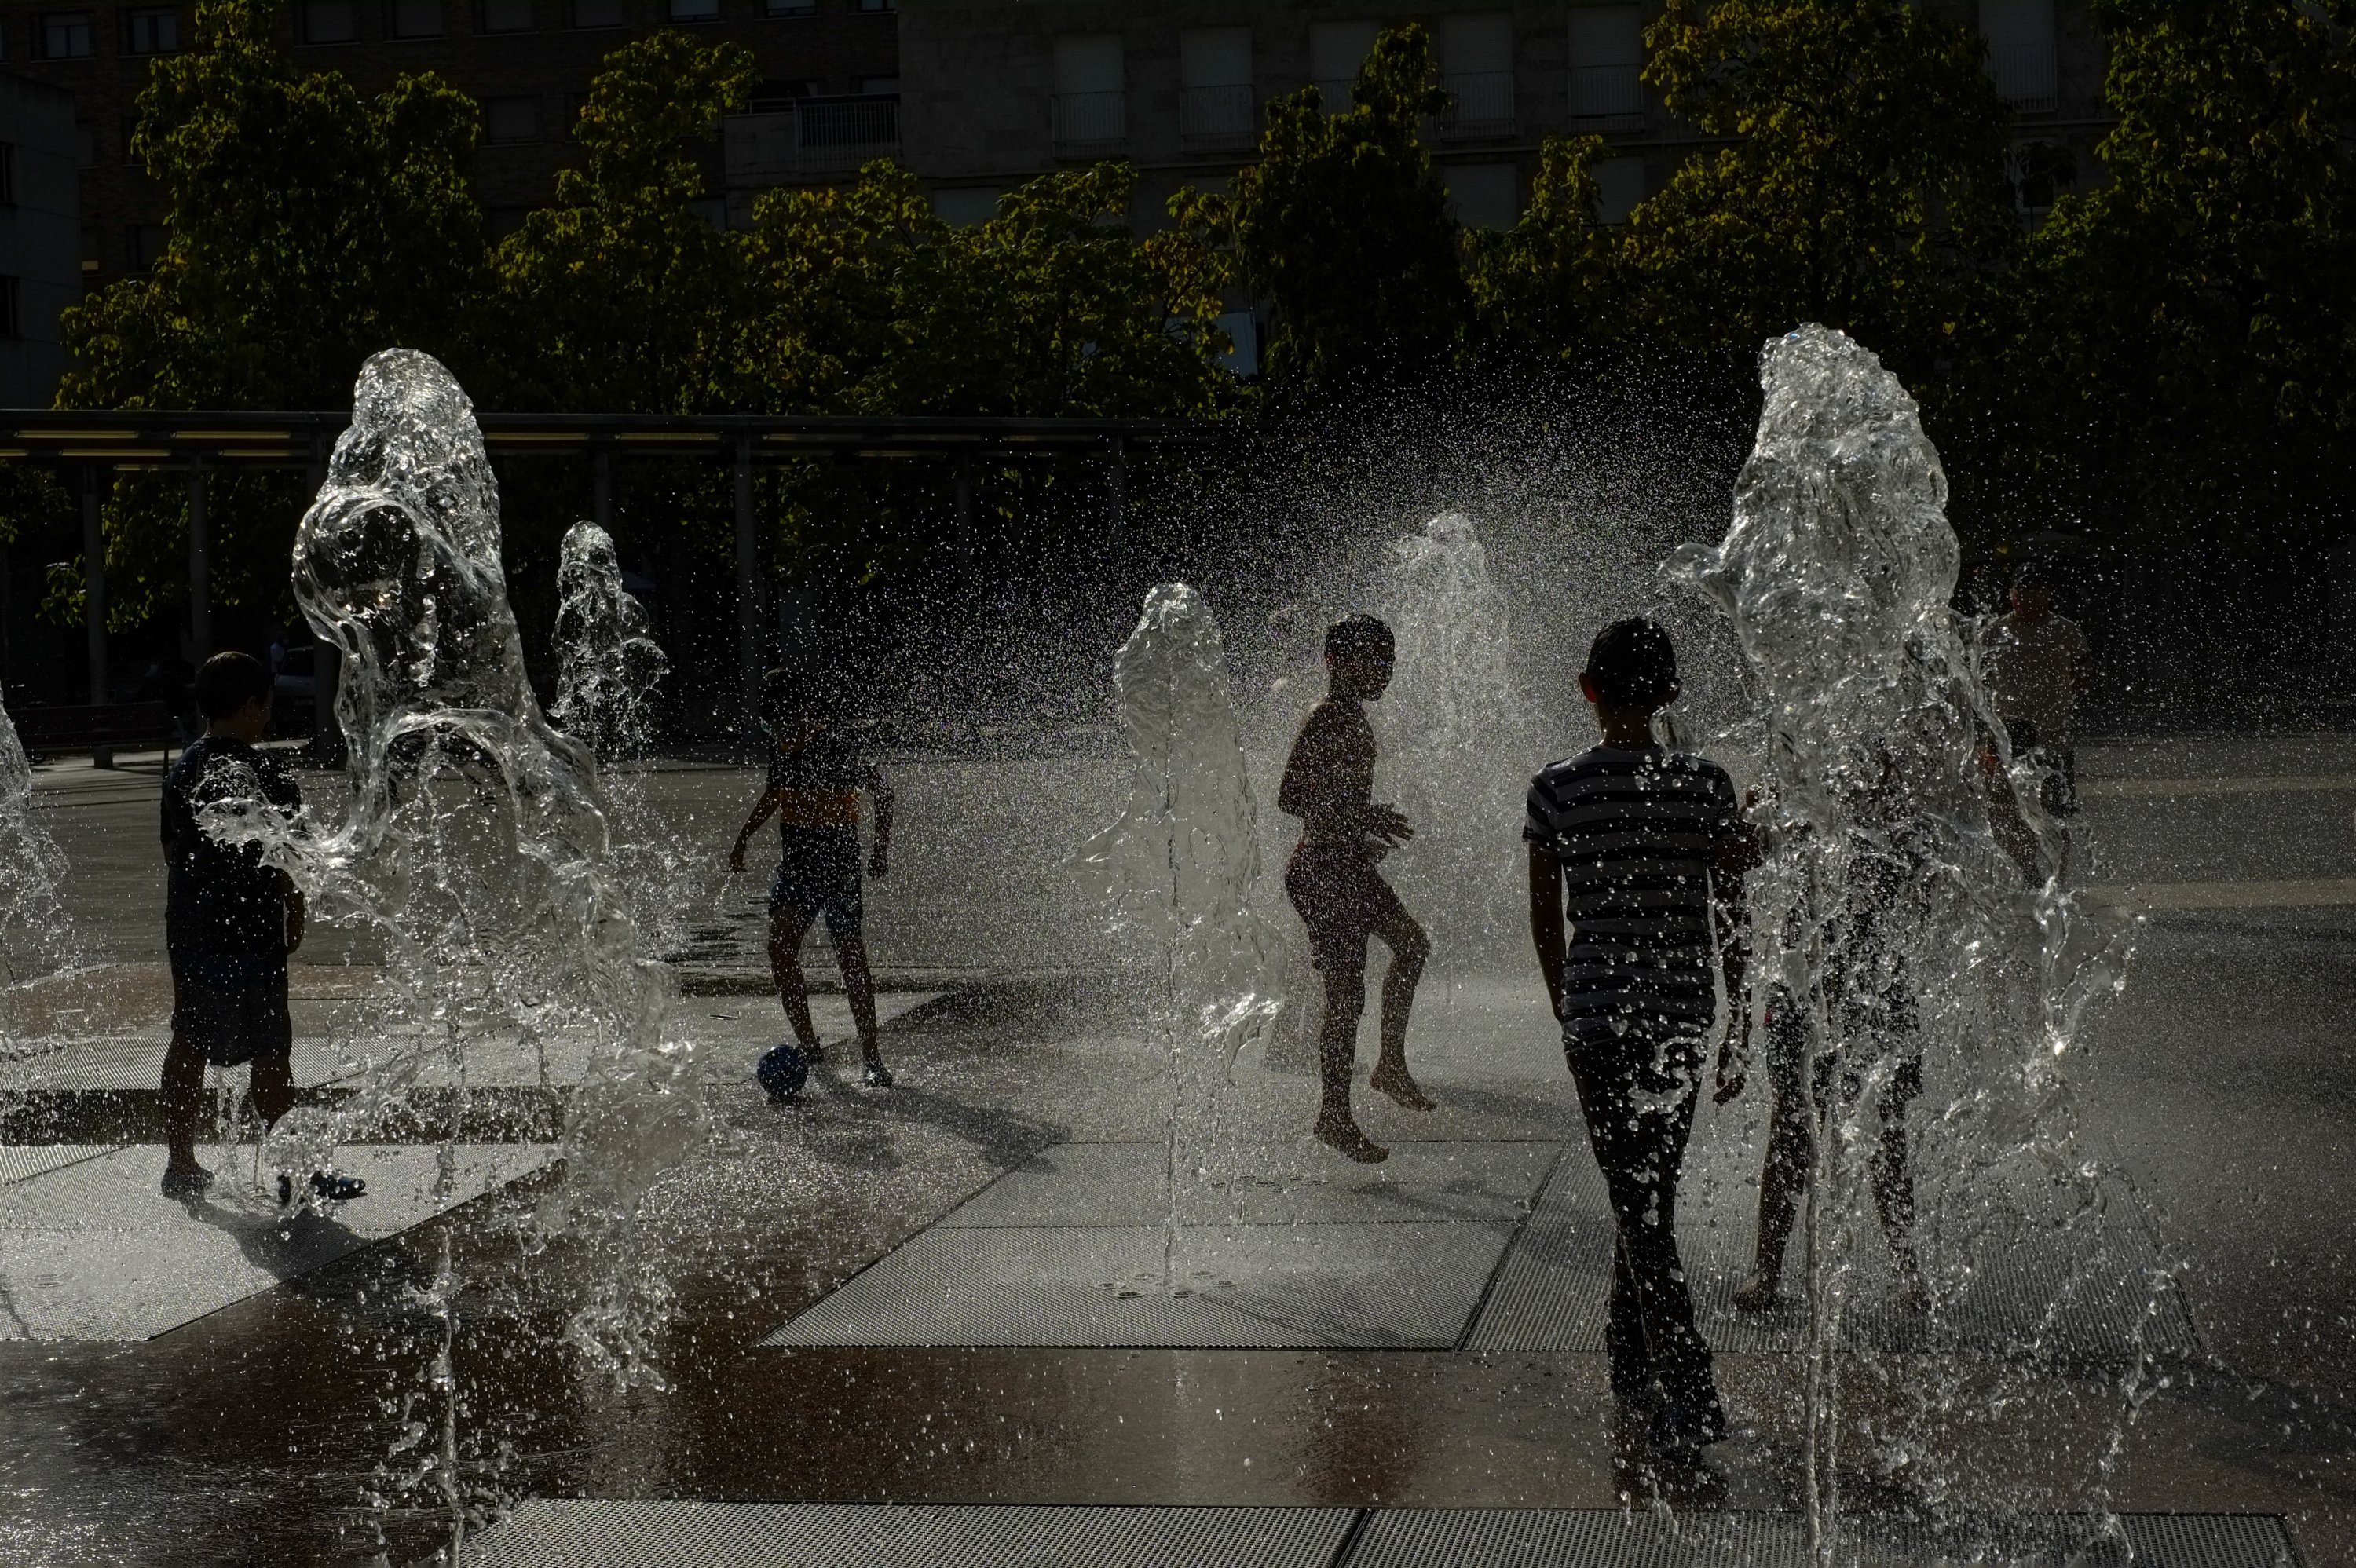 Children cool off with the water to the fountain during a heatwave in Pamplona, northern Spain, Aug. 13, 2021. (AP Photo)